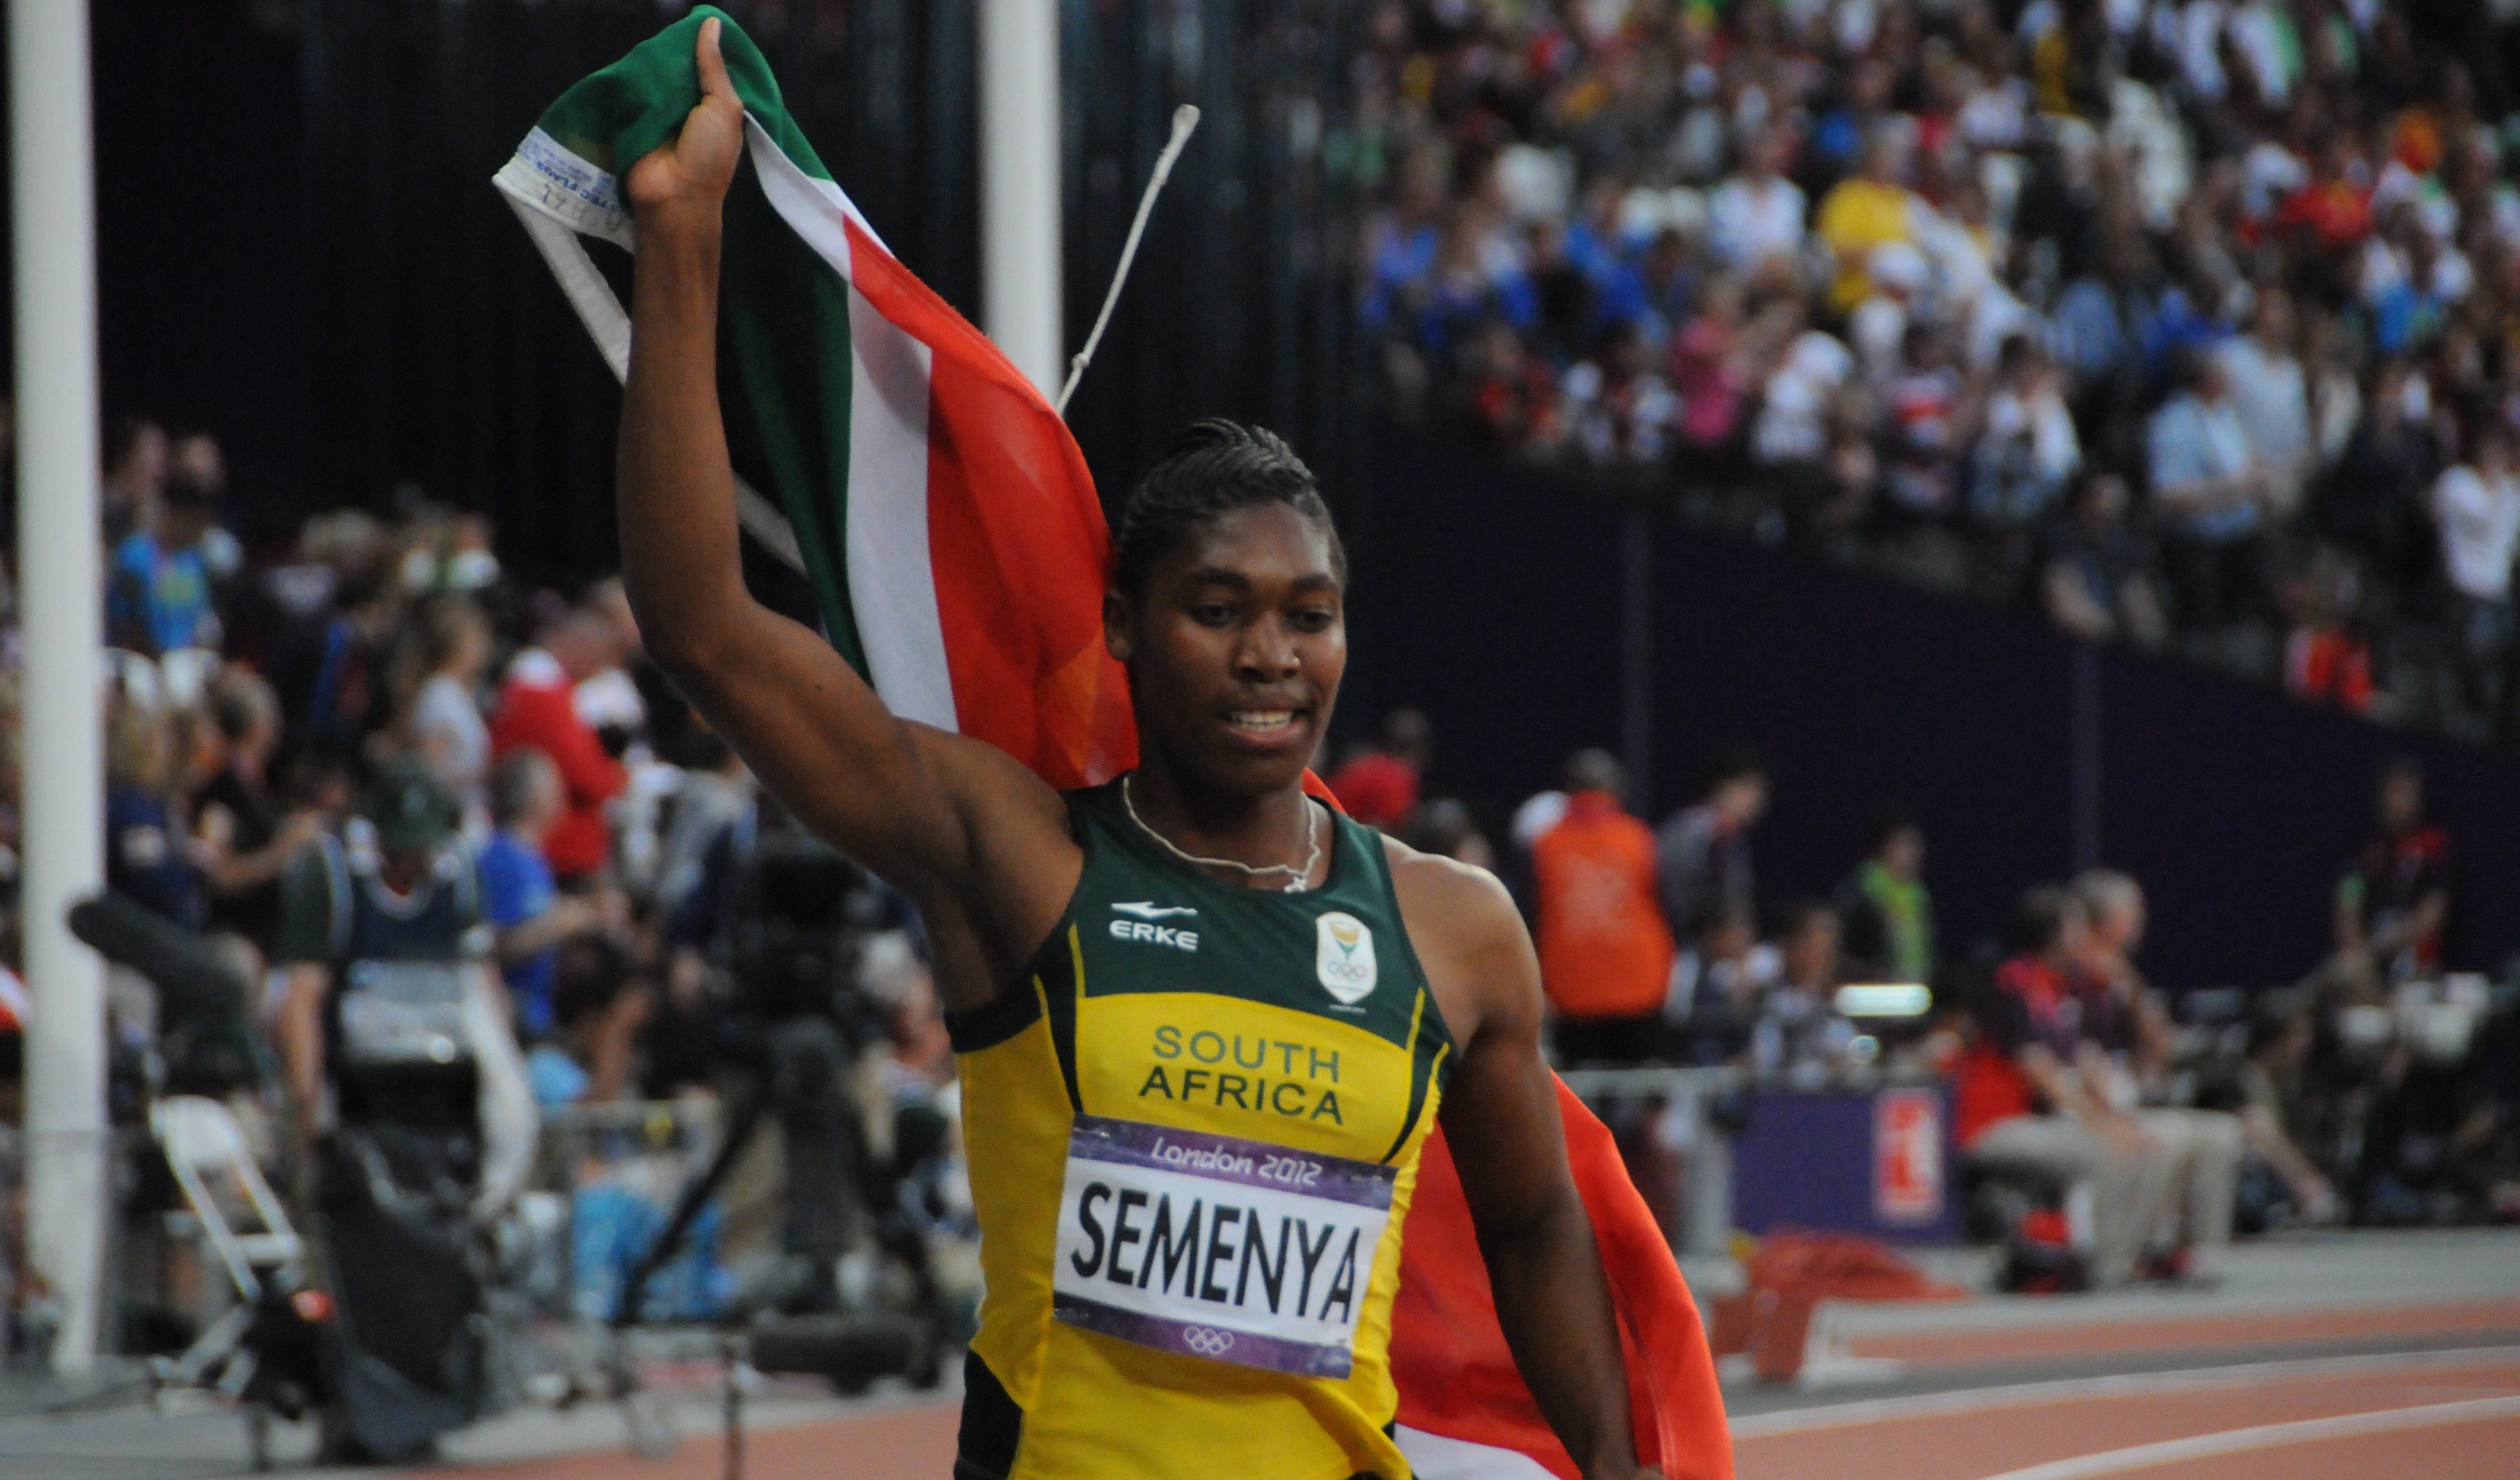 Some are calling on Olympian Caster Semenya, seen here at the 2012 Olympics, to undergo testing to see if she produces an atypical amount of testosterone. But other question whether such tests are valid or fair.